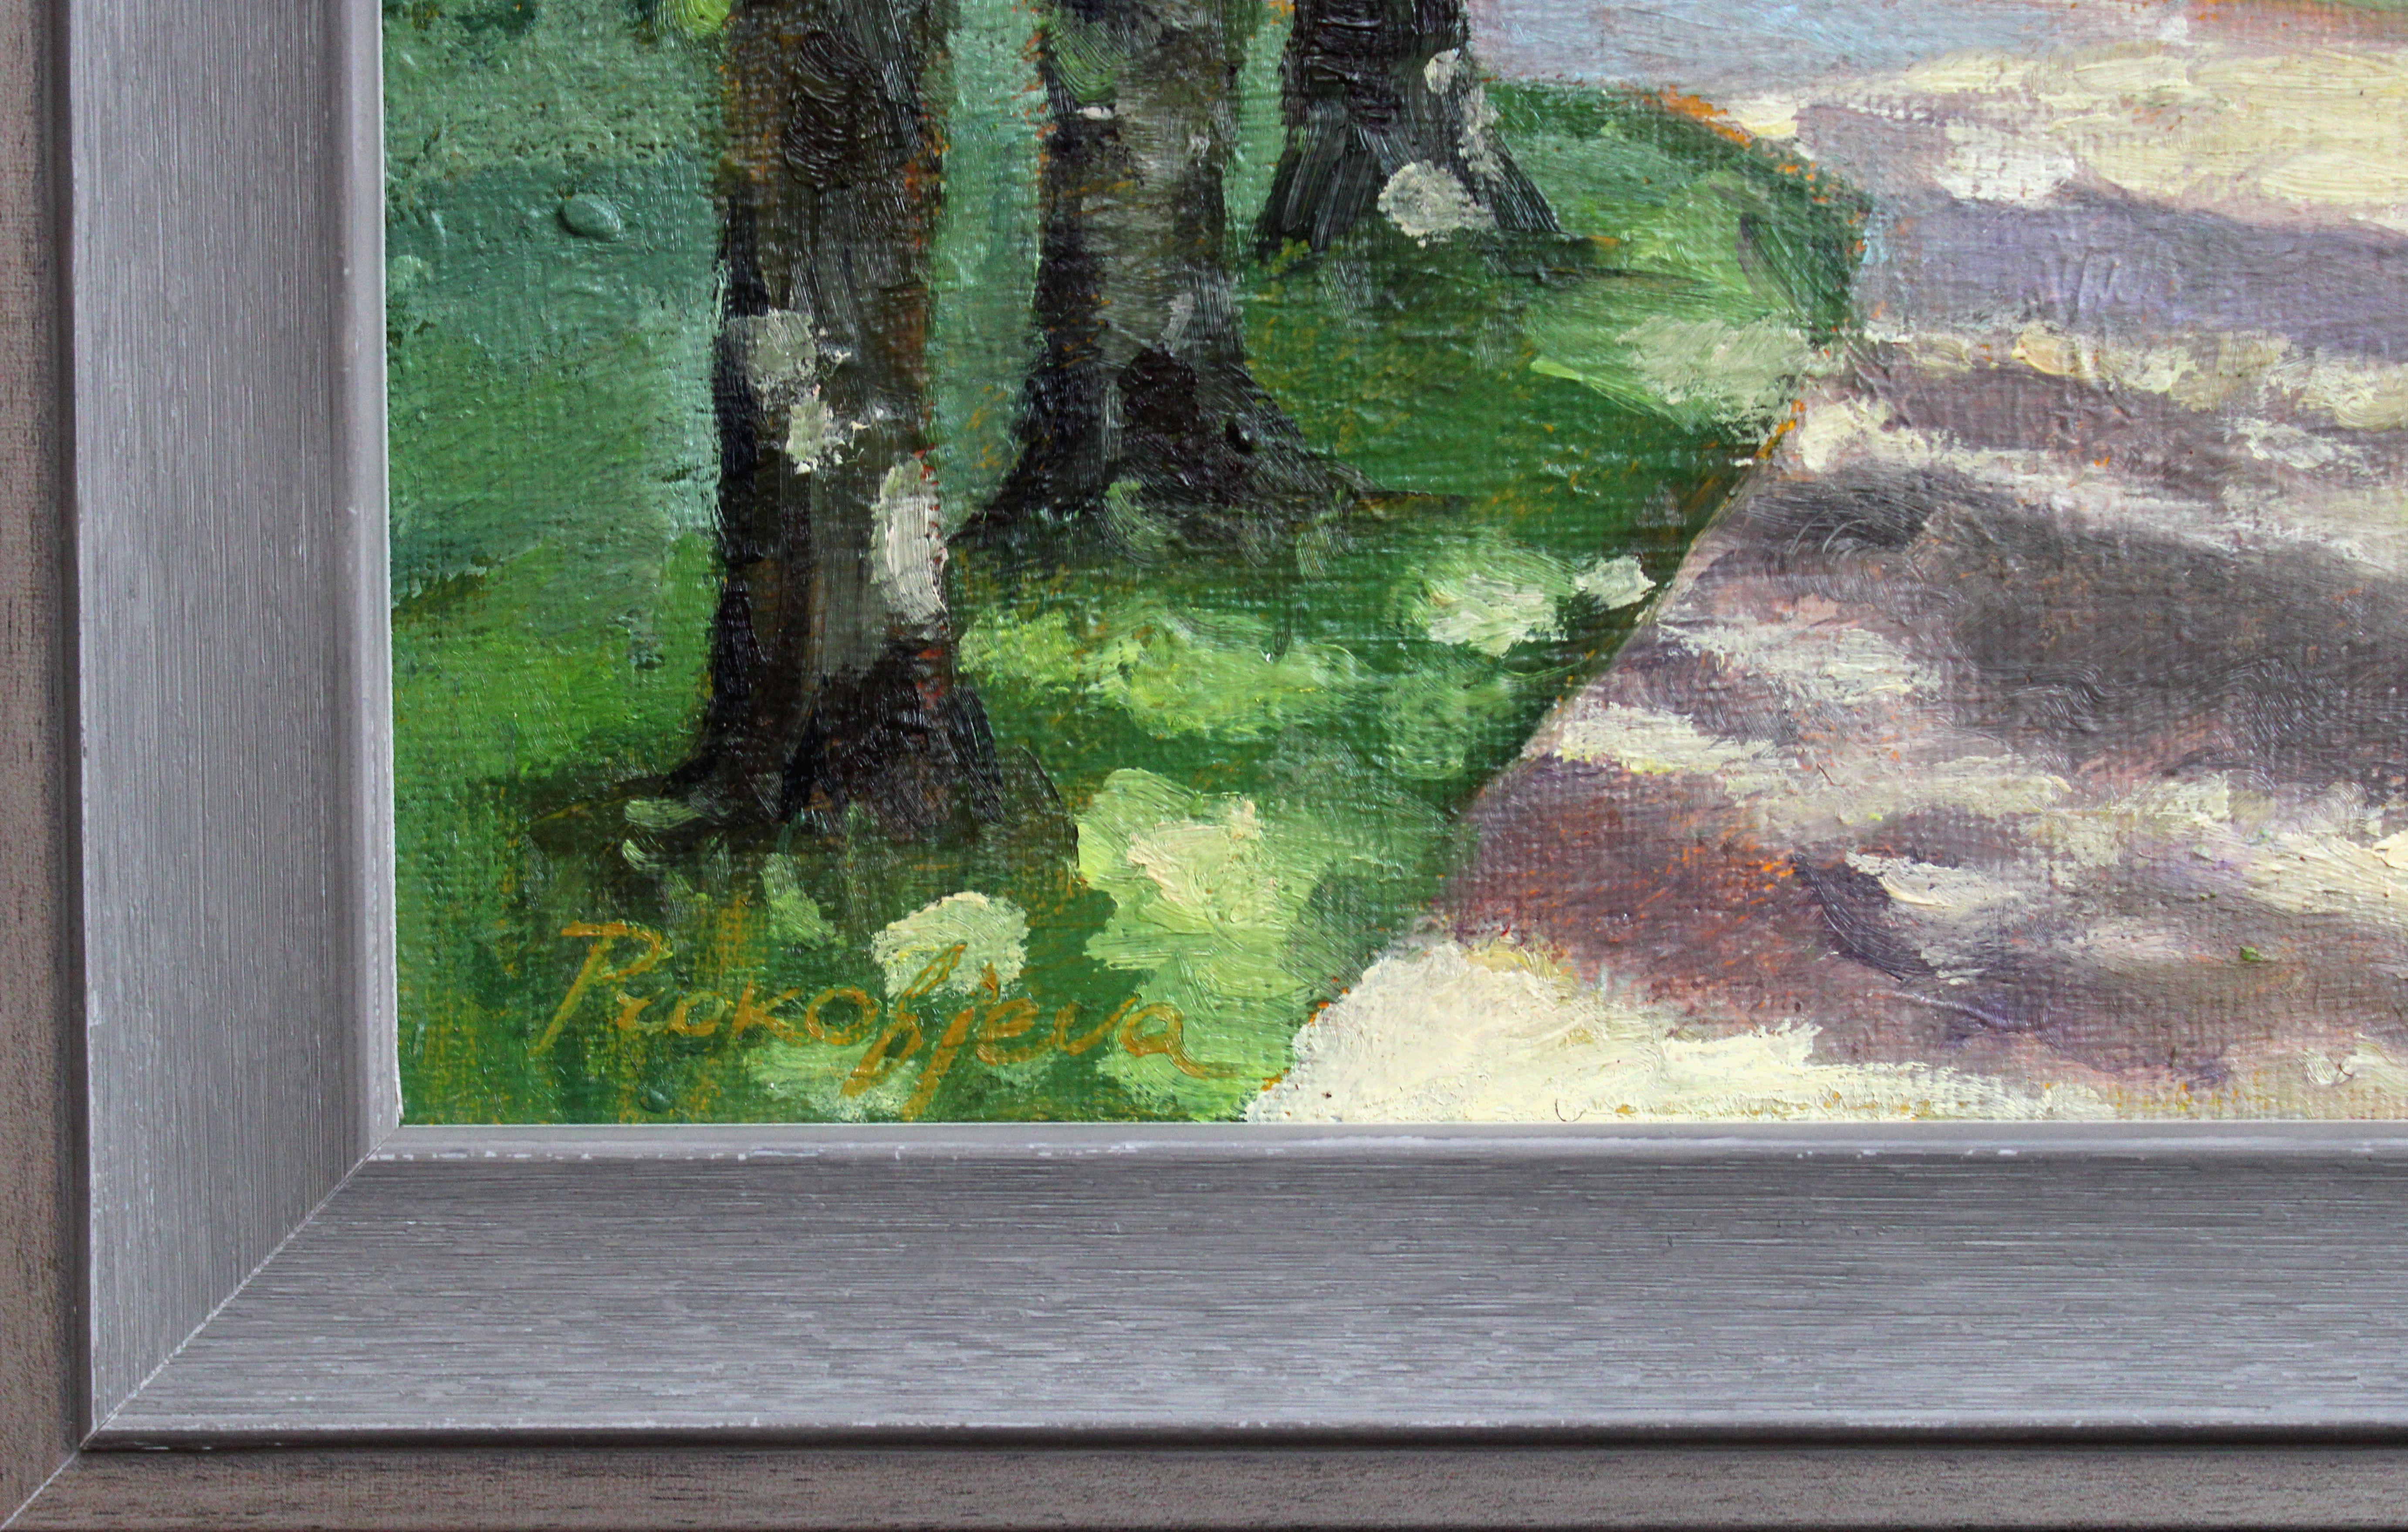 Alley. 2022., canvas, oil, 22.5x27.5 cm
Summer landscape with alley in small town in Latvia, Auce. Small size plein air painting with hundred-year-old oak trees

Alyona Prokofyeva (1988)

From 2016 surname Galaktionova. Alyona graduated Riga art